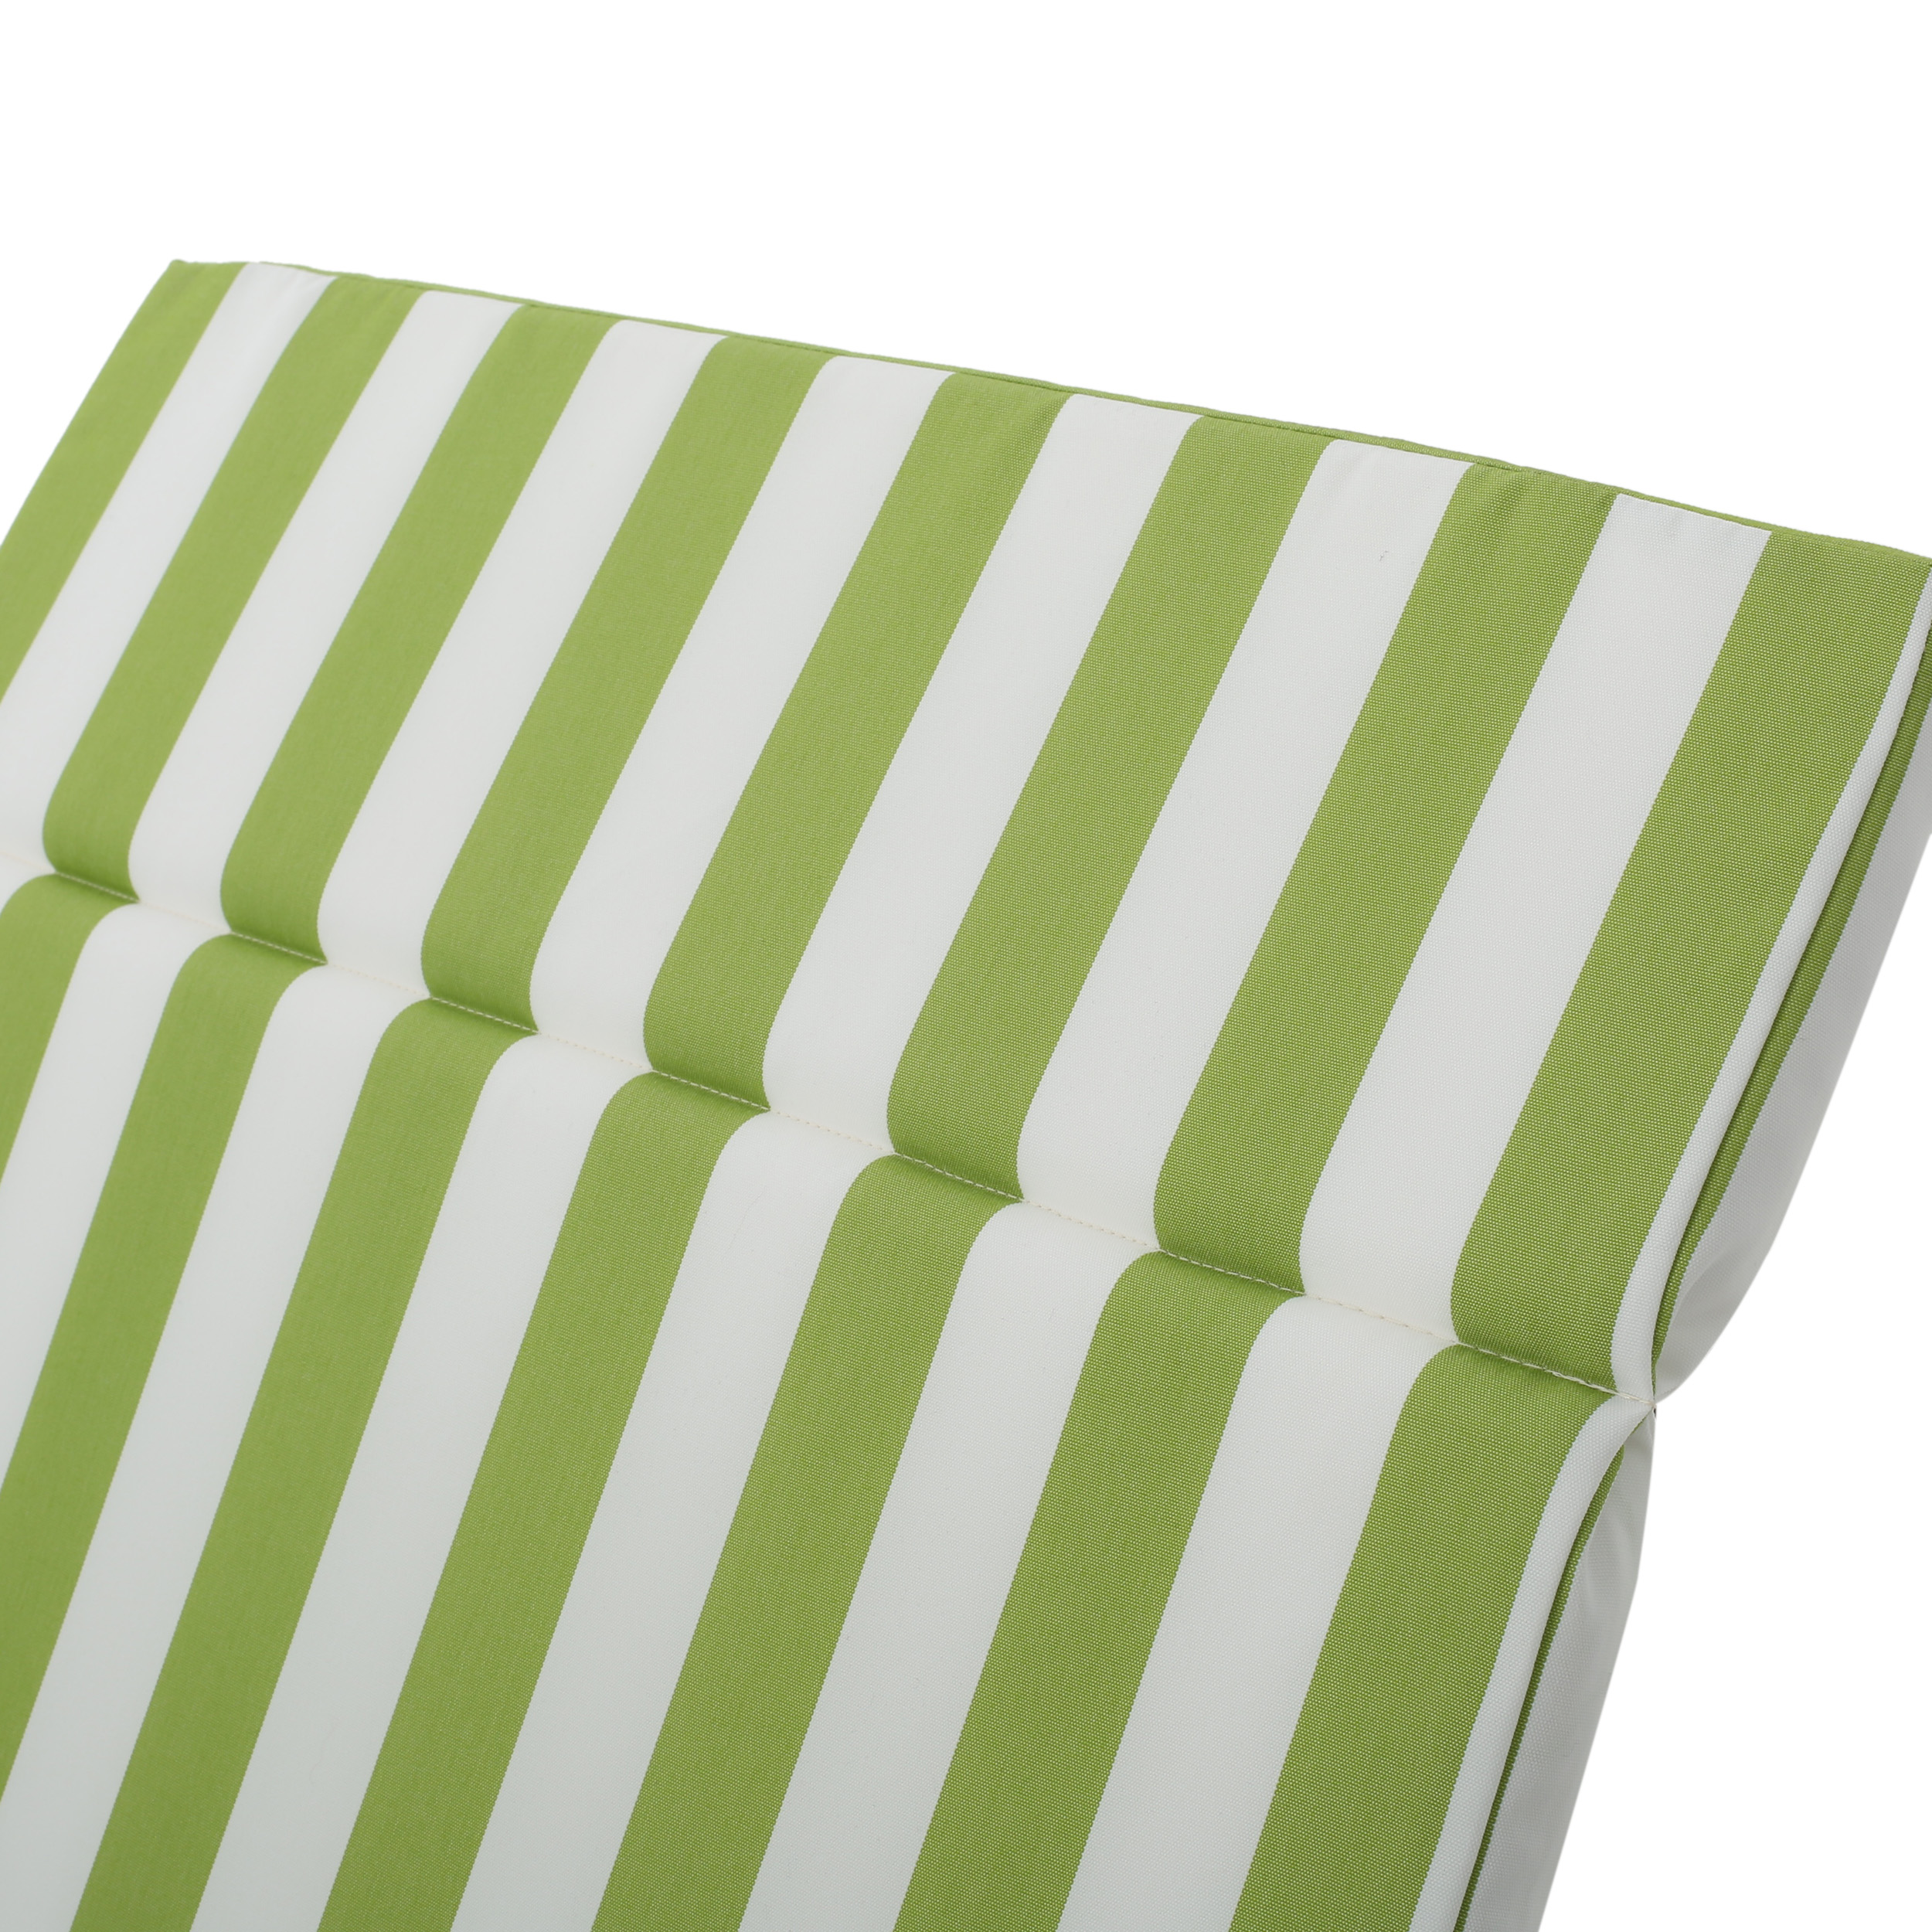 Anthony Outdoor Water Resistant Chaise Lounge Cushion, Green and White Stripe - image 5 of 6